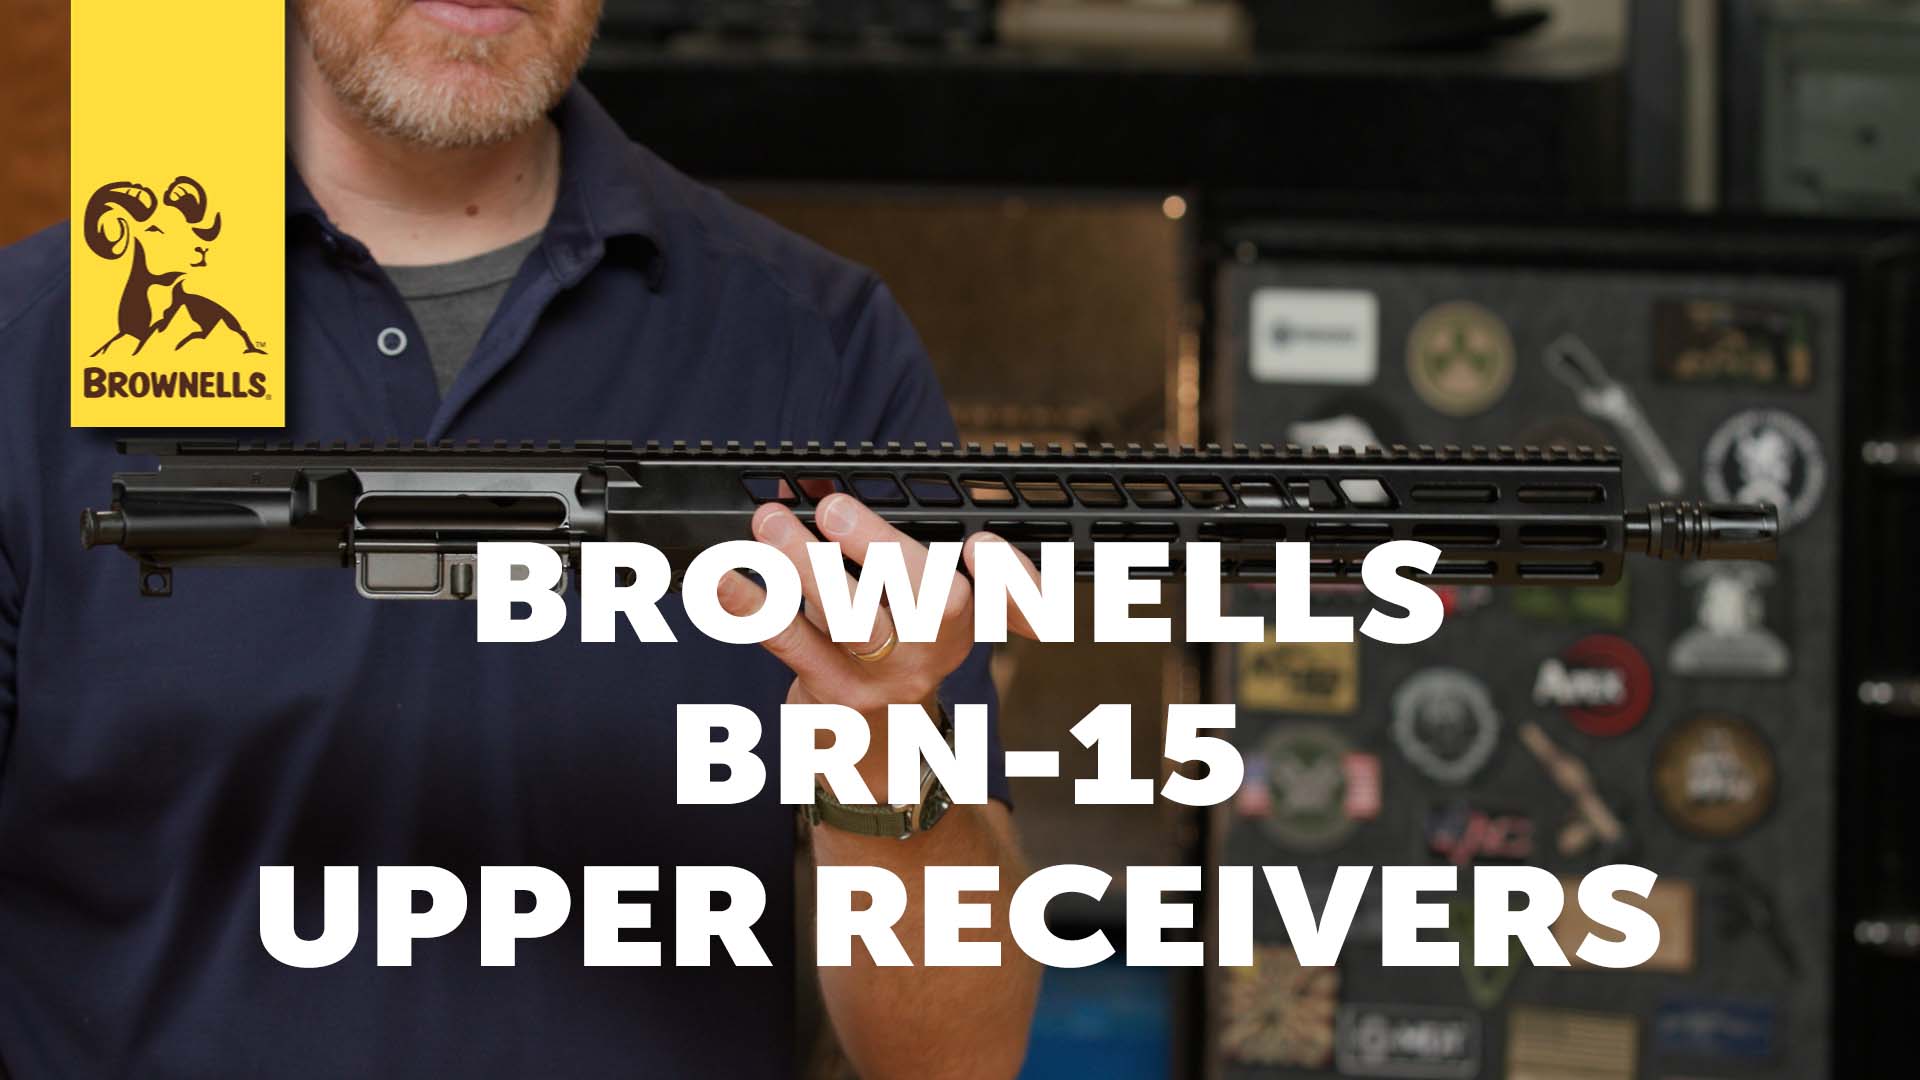 New Products: Brownells BRN-15 Upper Receiver